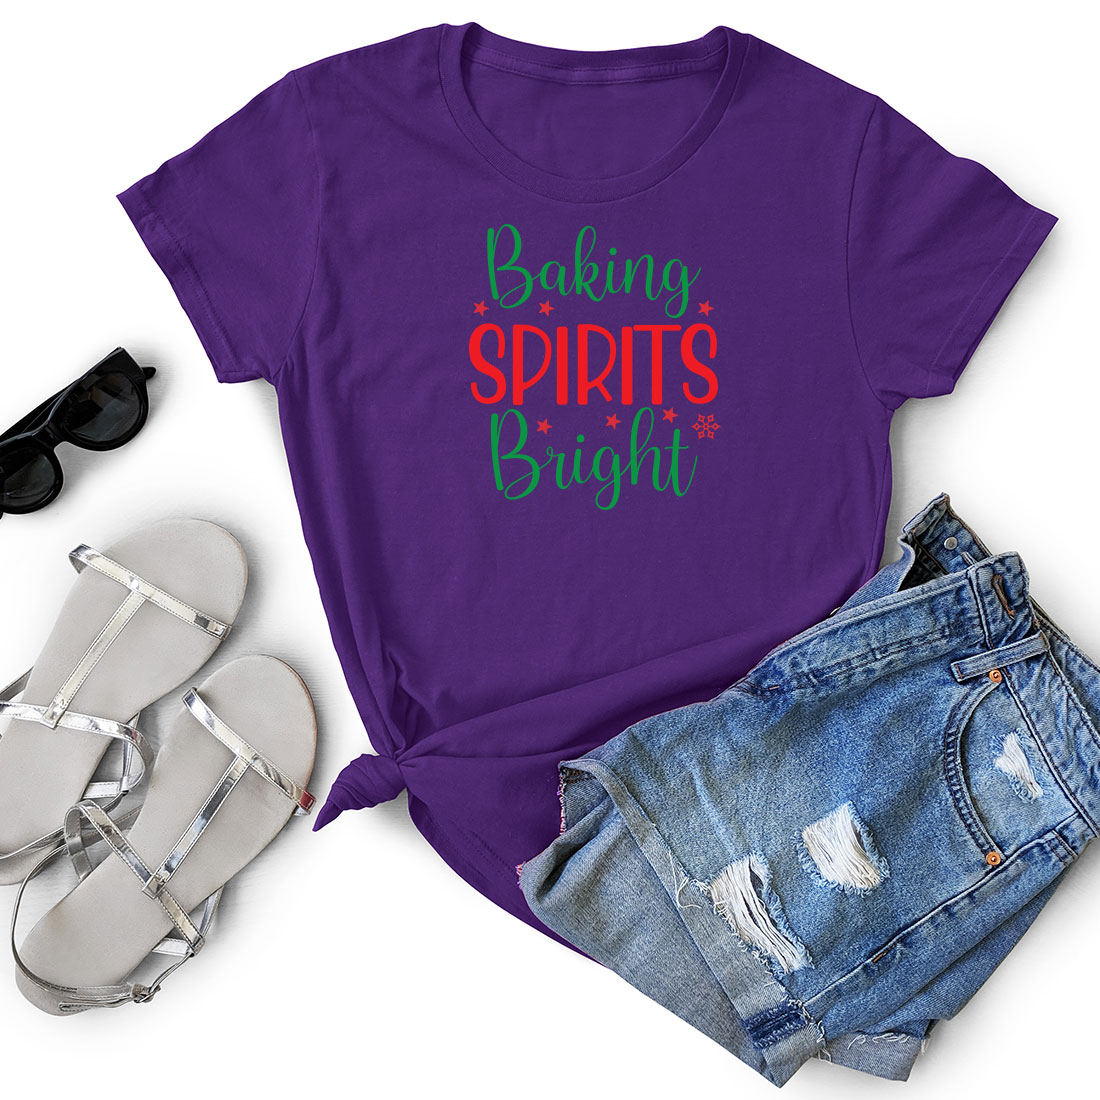 T - shirt that says racing spirits is bright.